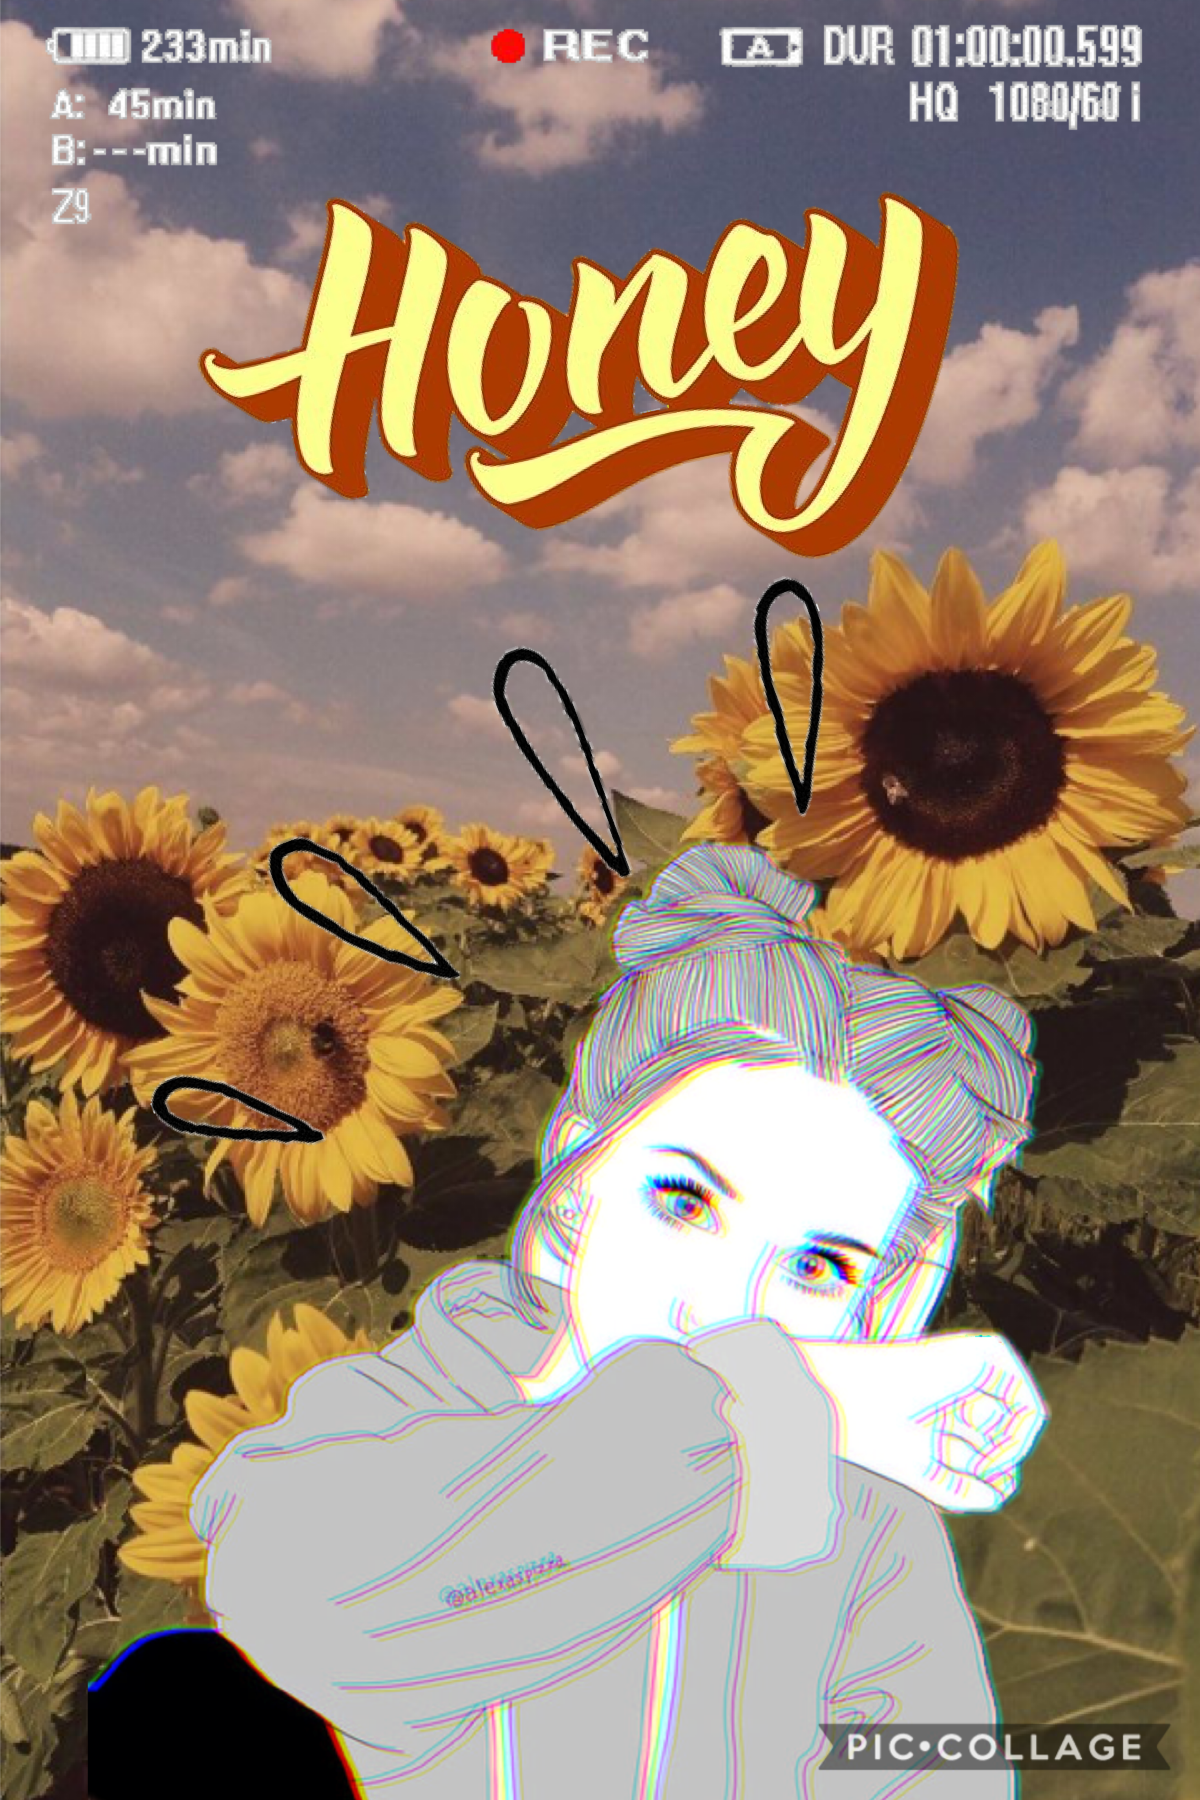 Simple but Honey it’s aesthetic and that’s all that matters. Lol 🌻 🍯 🎥 💧 